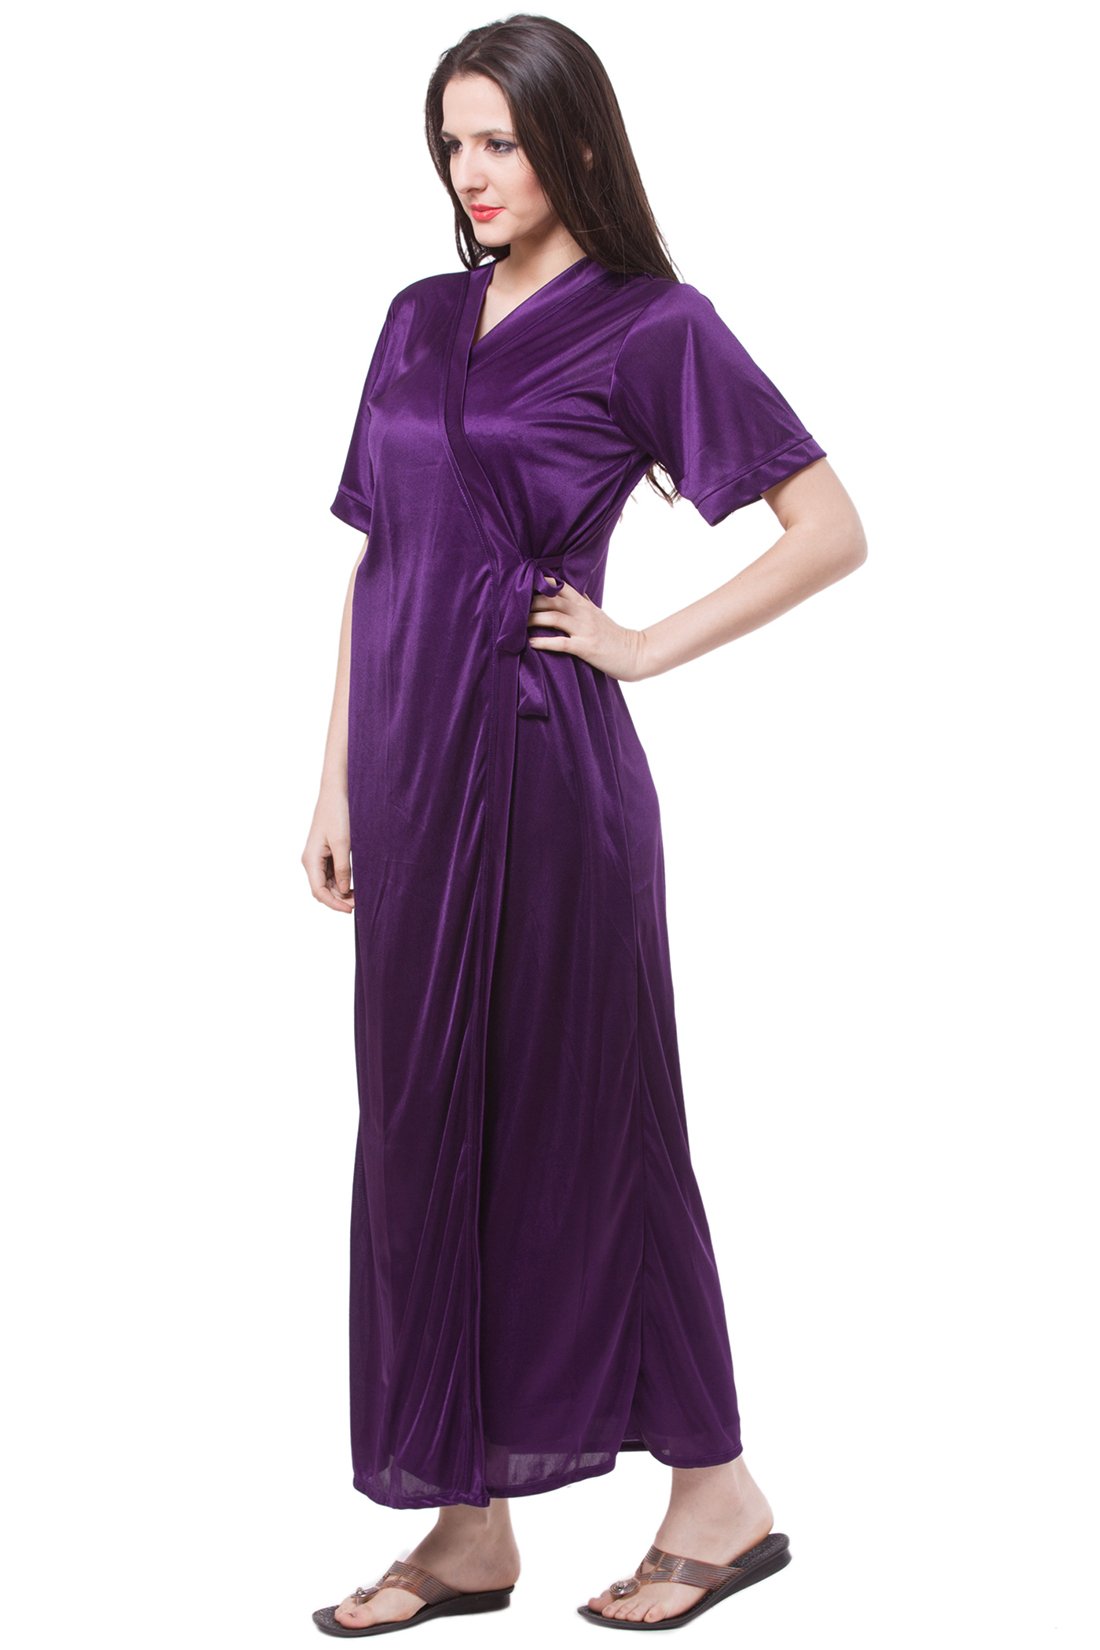 Aria Satin Nightdress and Robe Clearance The Orange Tags